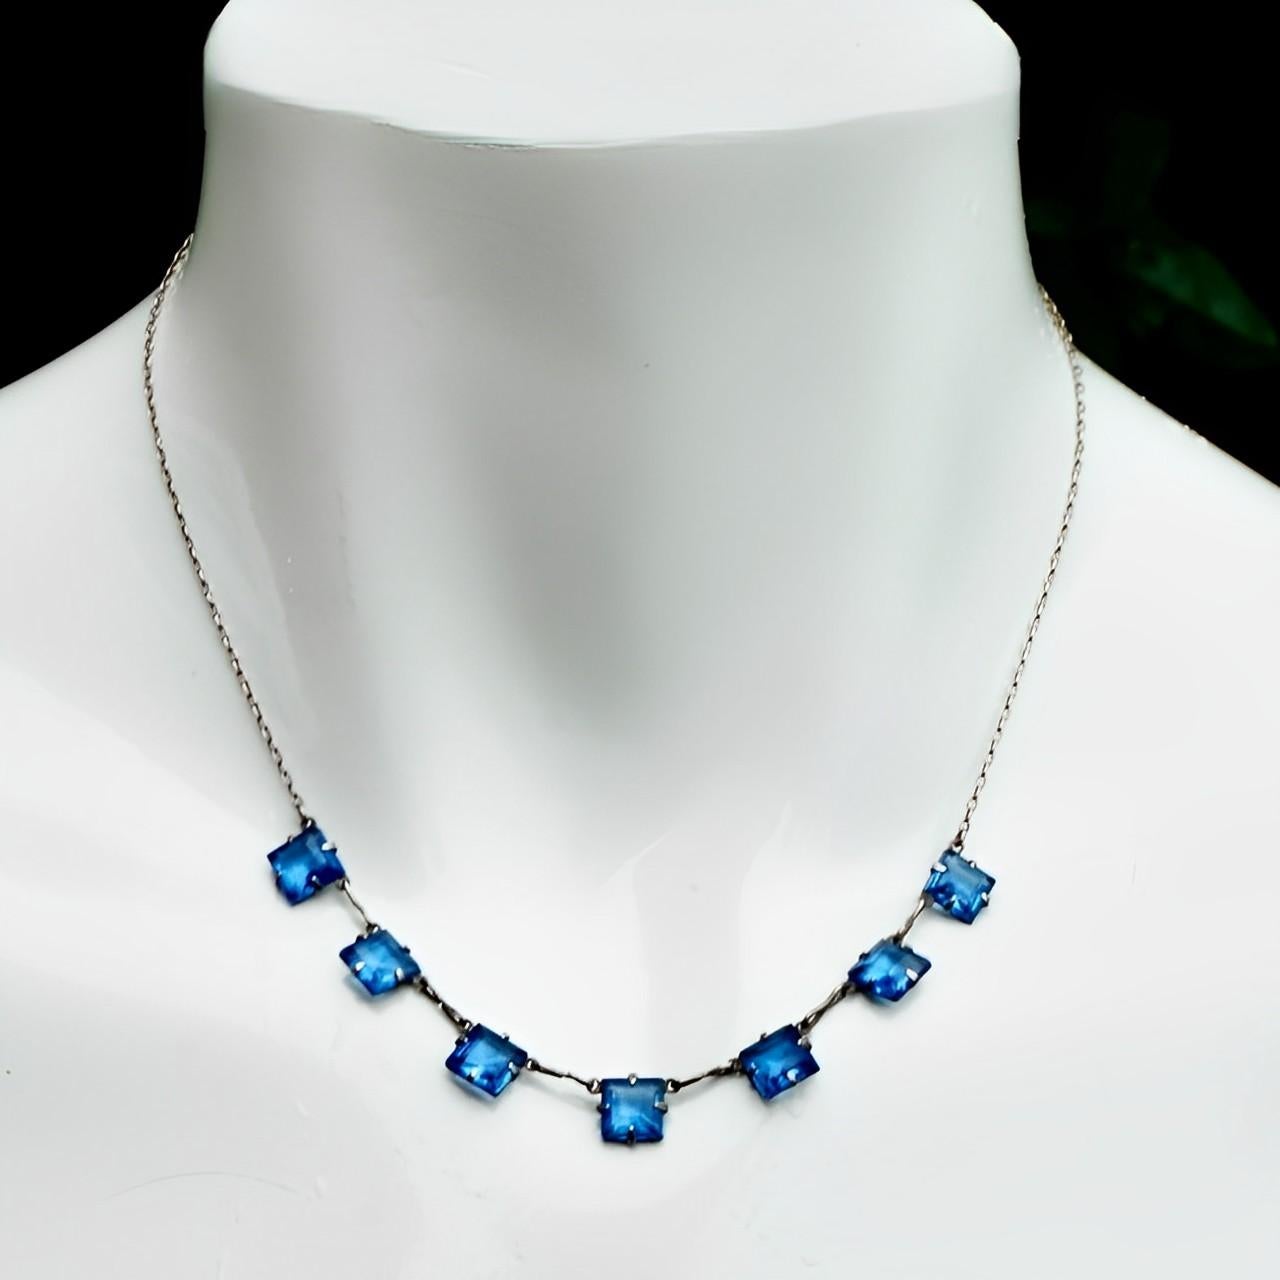 Women's or Men's Art Deco Silver Tone Chain Necklace with Square Azure Blue Glass Crystals For Sale